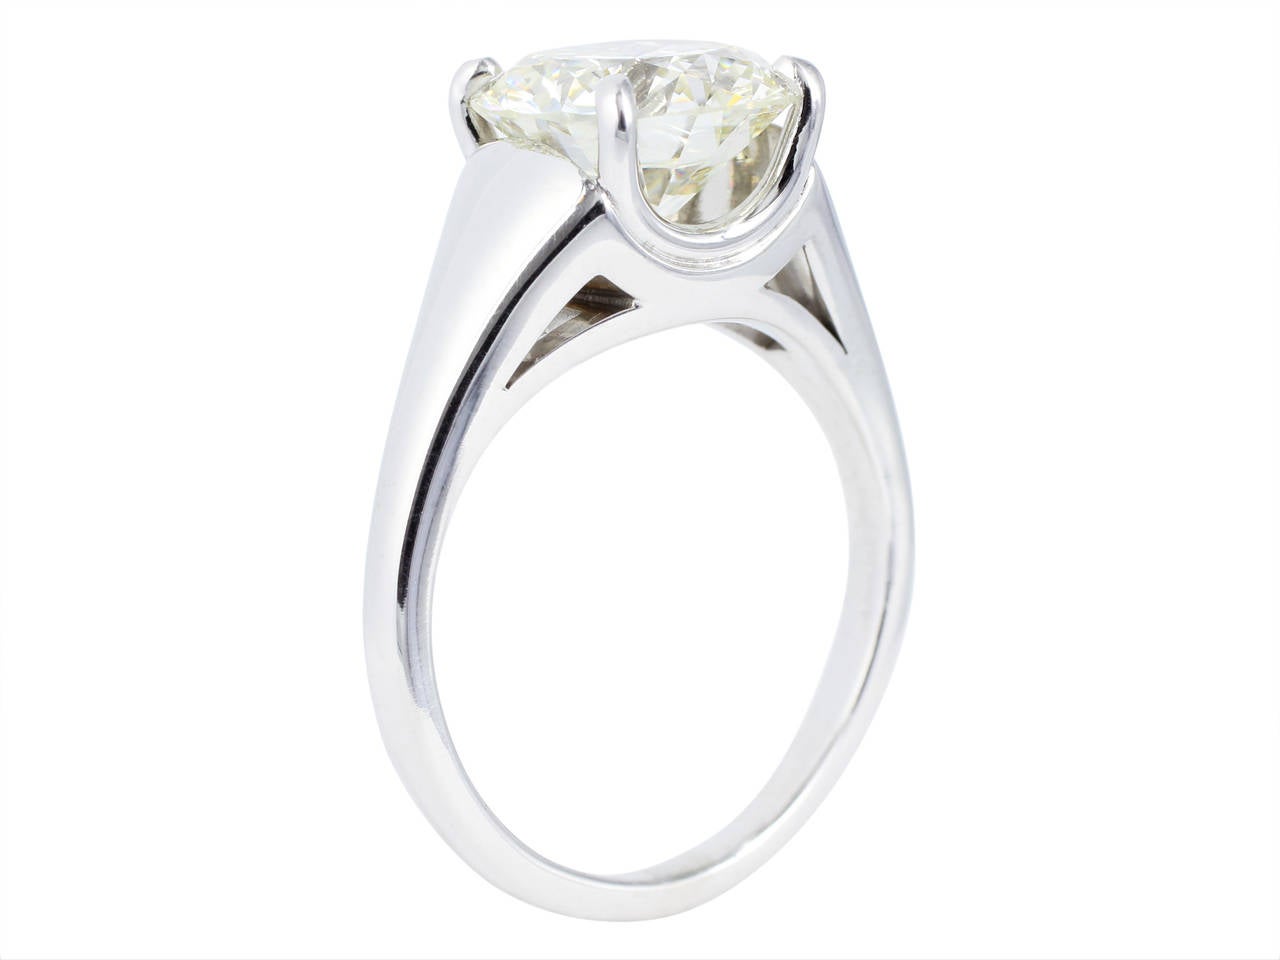 Platinum solitaire style engagement ring consisting of 1 round brilliant cut diamond weighing 3.34 carats, measuring around 9.74-9.79 mm in diameter and having an approximate color and clarity of J-KVS1. The mounting is designed with a U shaped